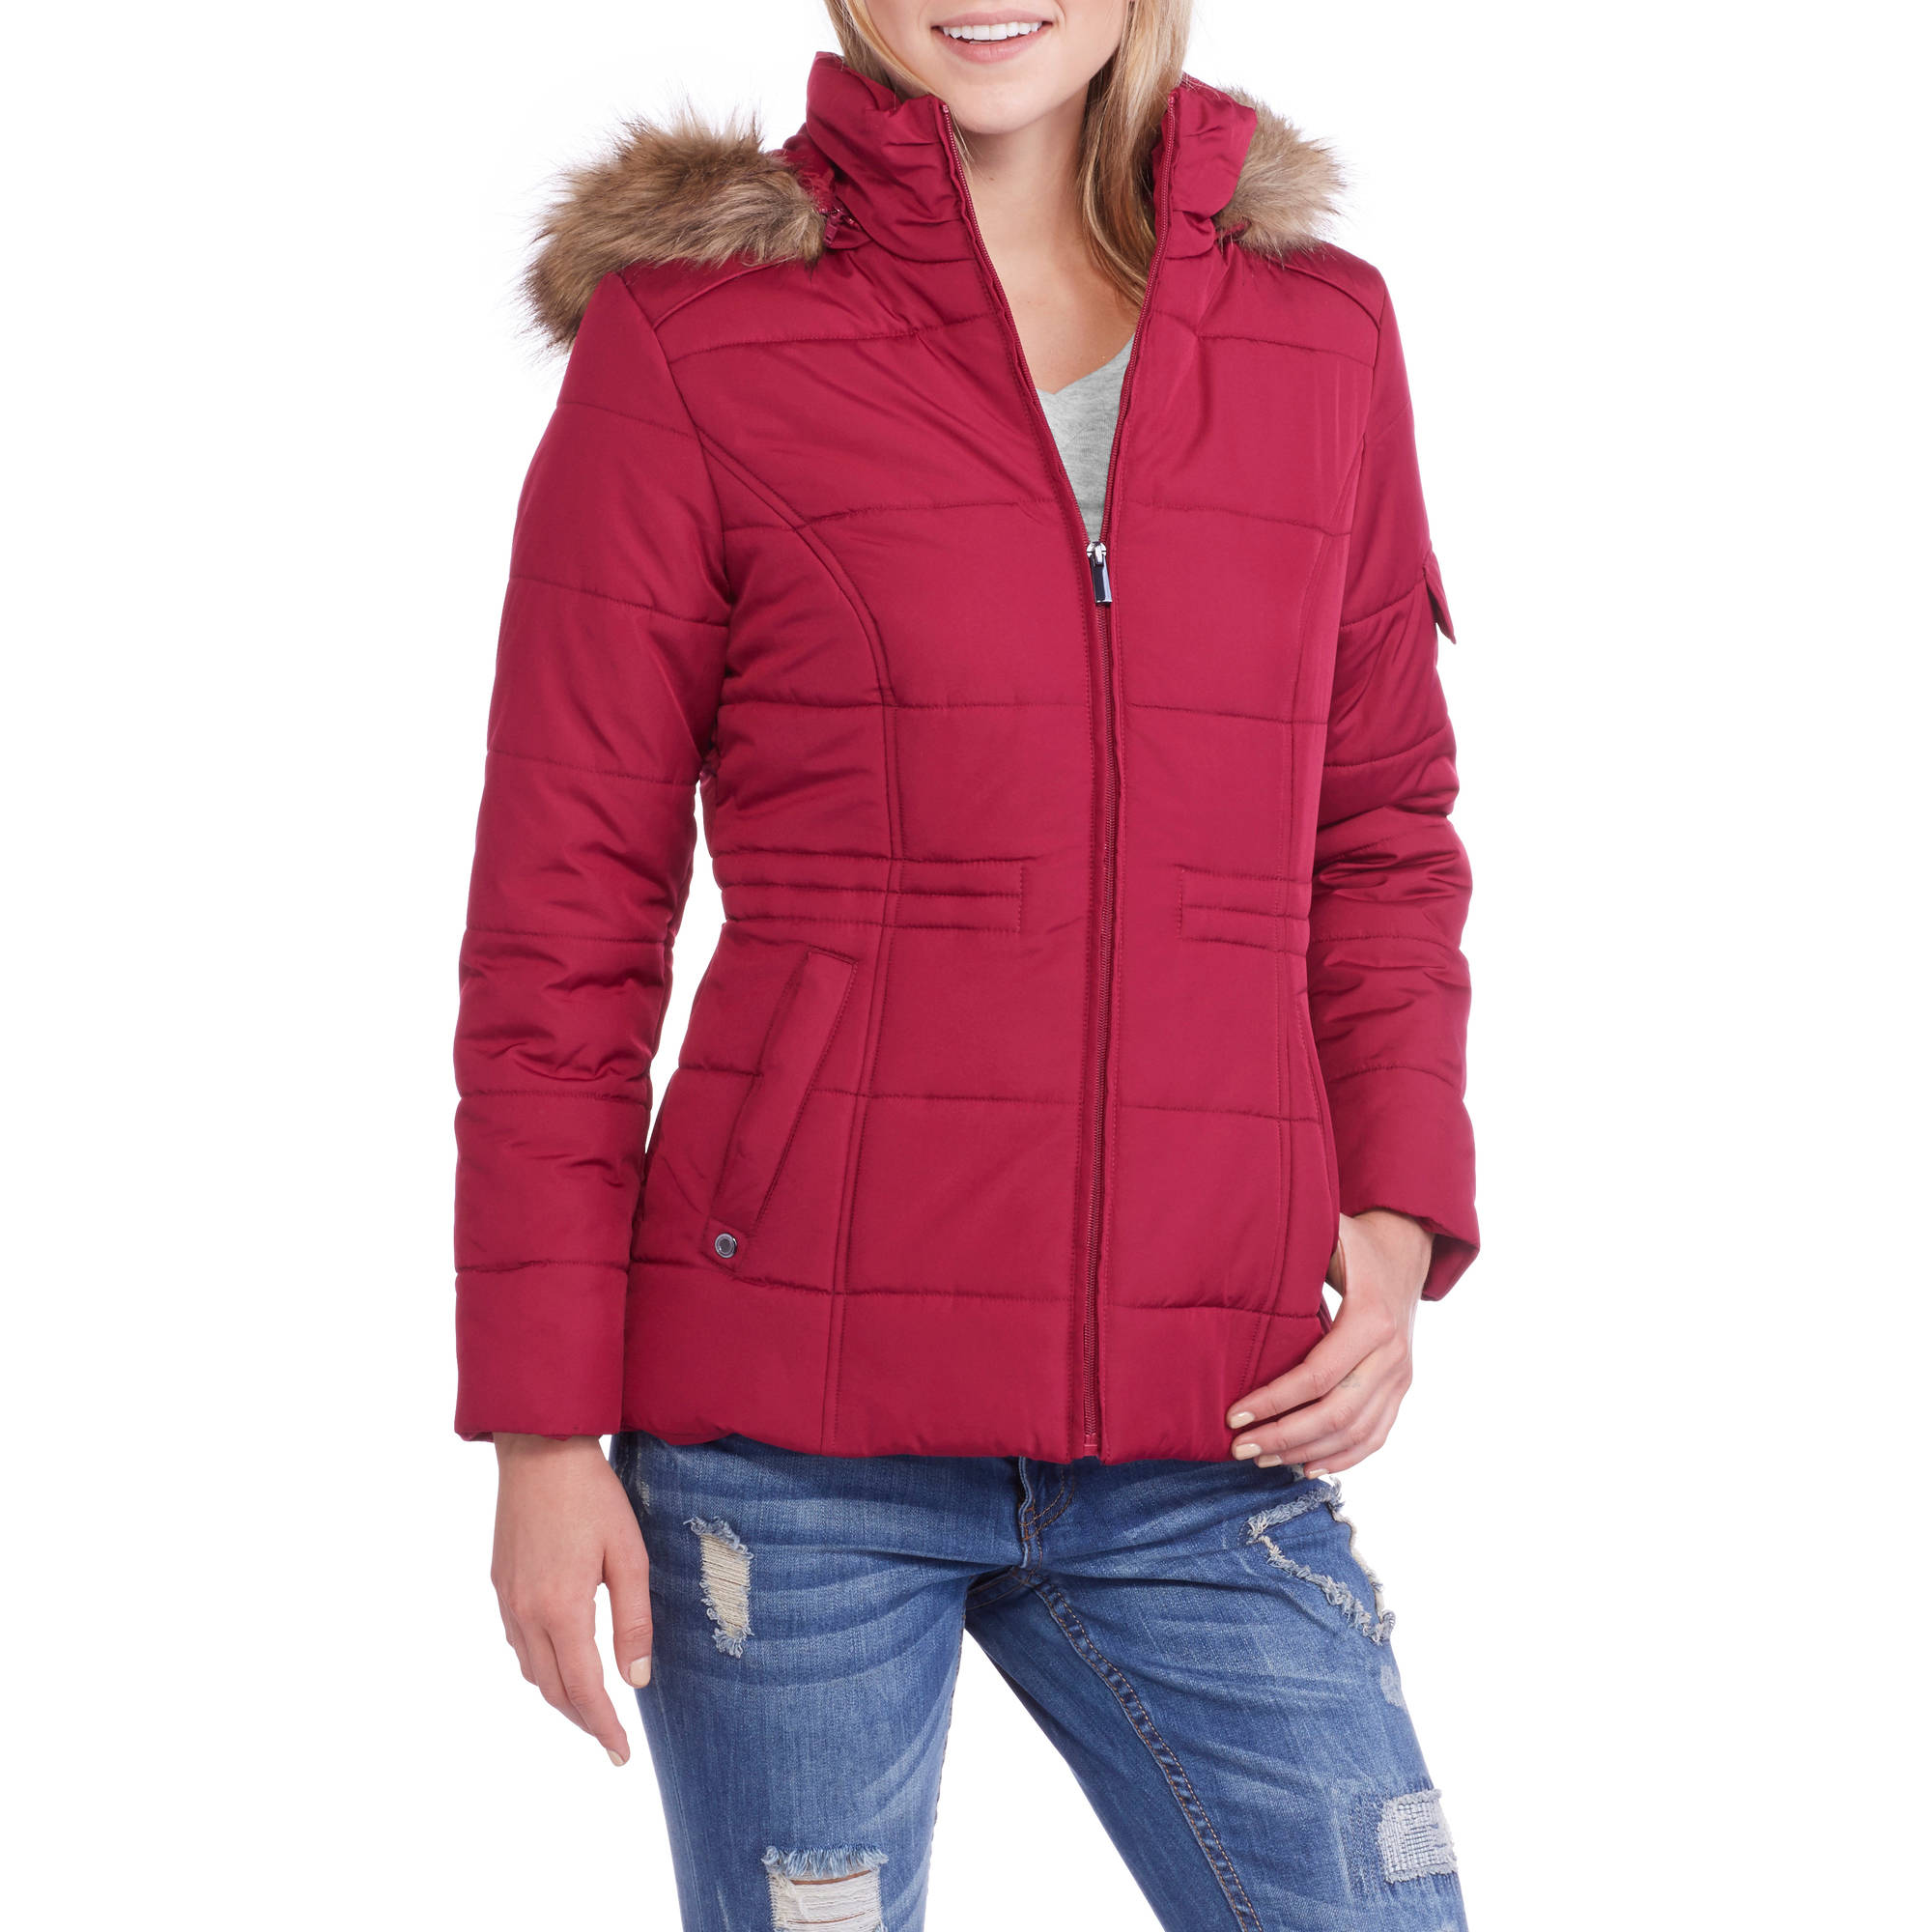 Women's Quilted Puffer Jacket with Fur-Trim Hood - image 1 of 2